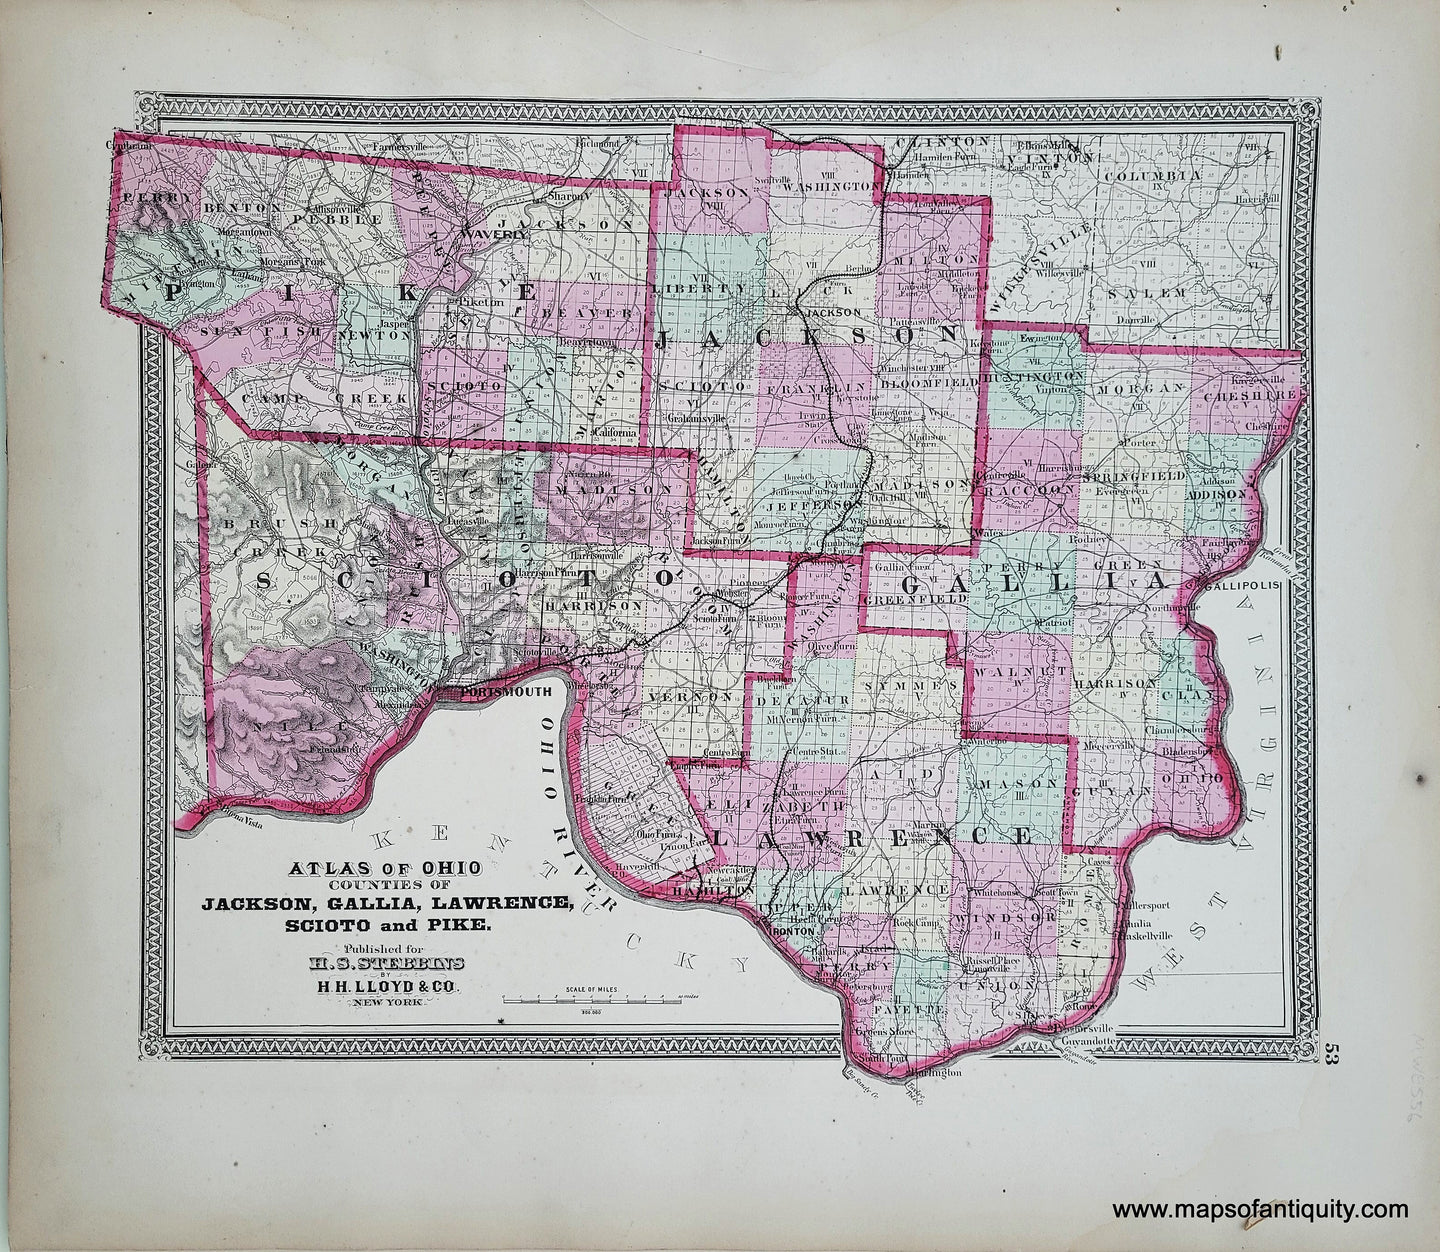 Genuine-Antique-Hand-colored-Map-Atlas-of-Ohio-Counties-of-Jackson-Gallia-Lawrence-Scioto-and-Pike-1868-Stebbins-Lloyd-Maps-Of-Antiquity